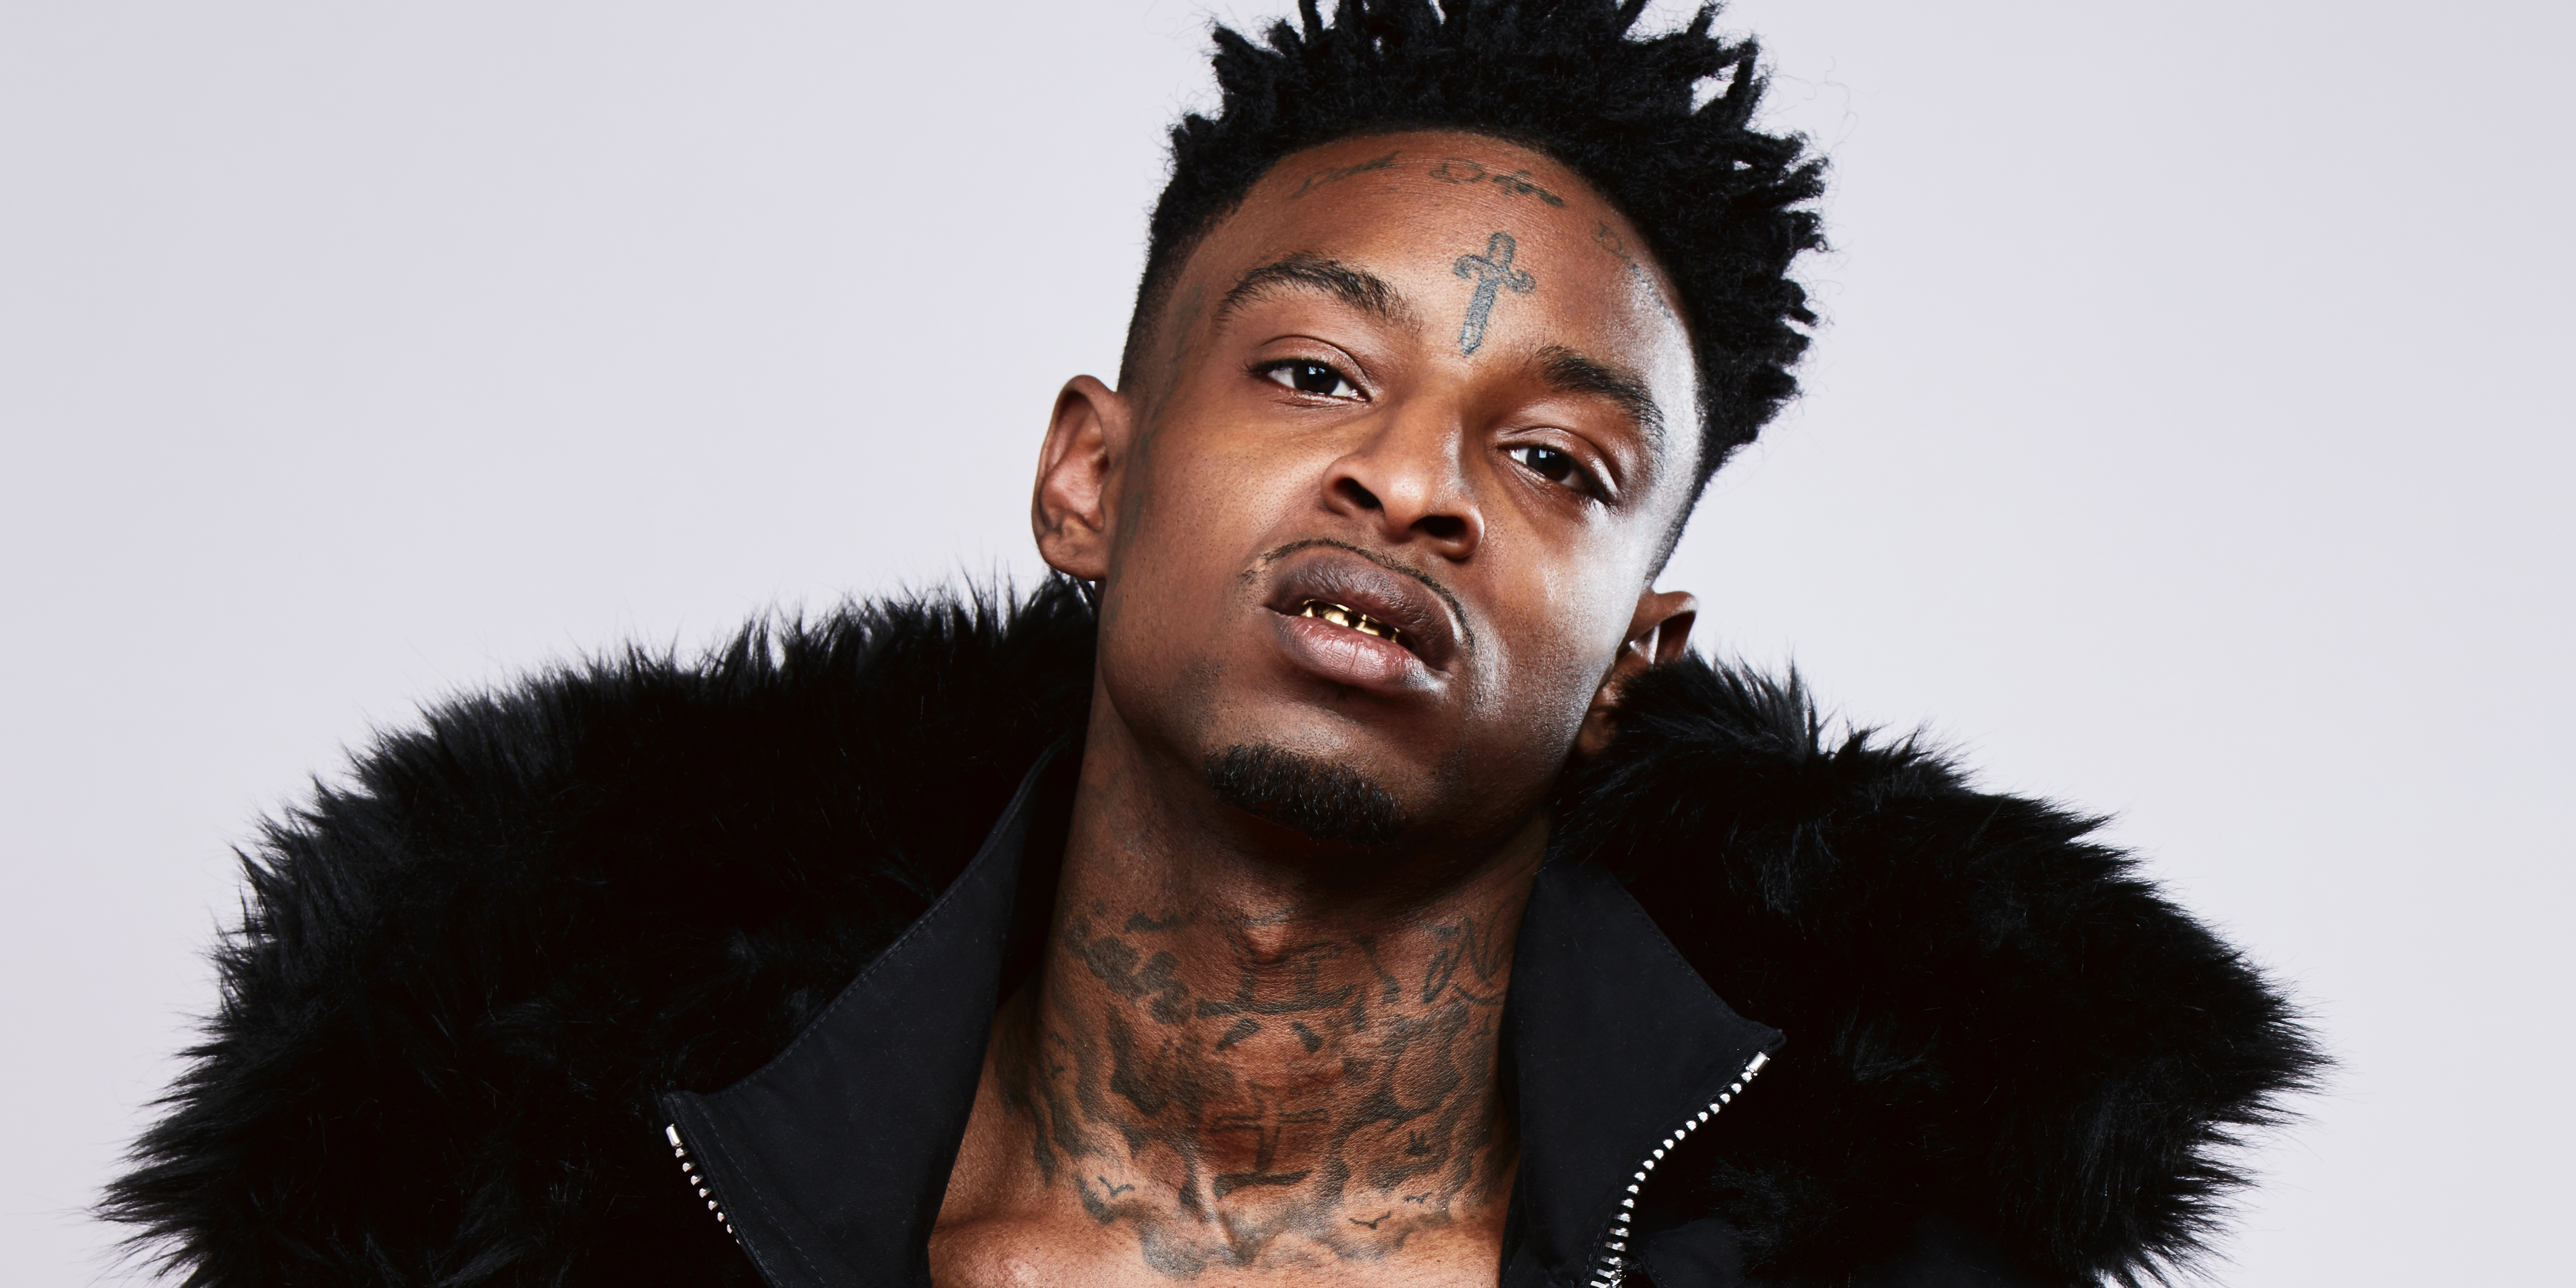 Savage wallpaper for desktop, download free 21 Savage picture and background for PC